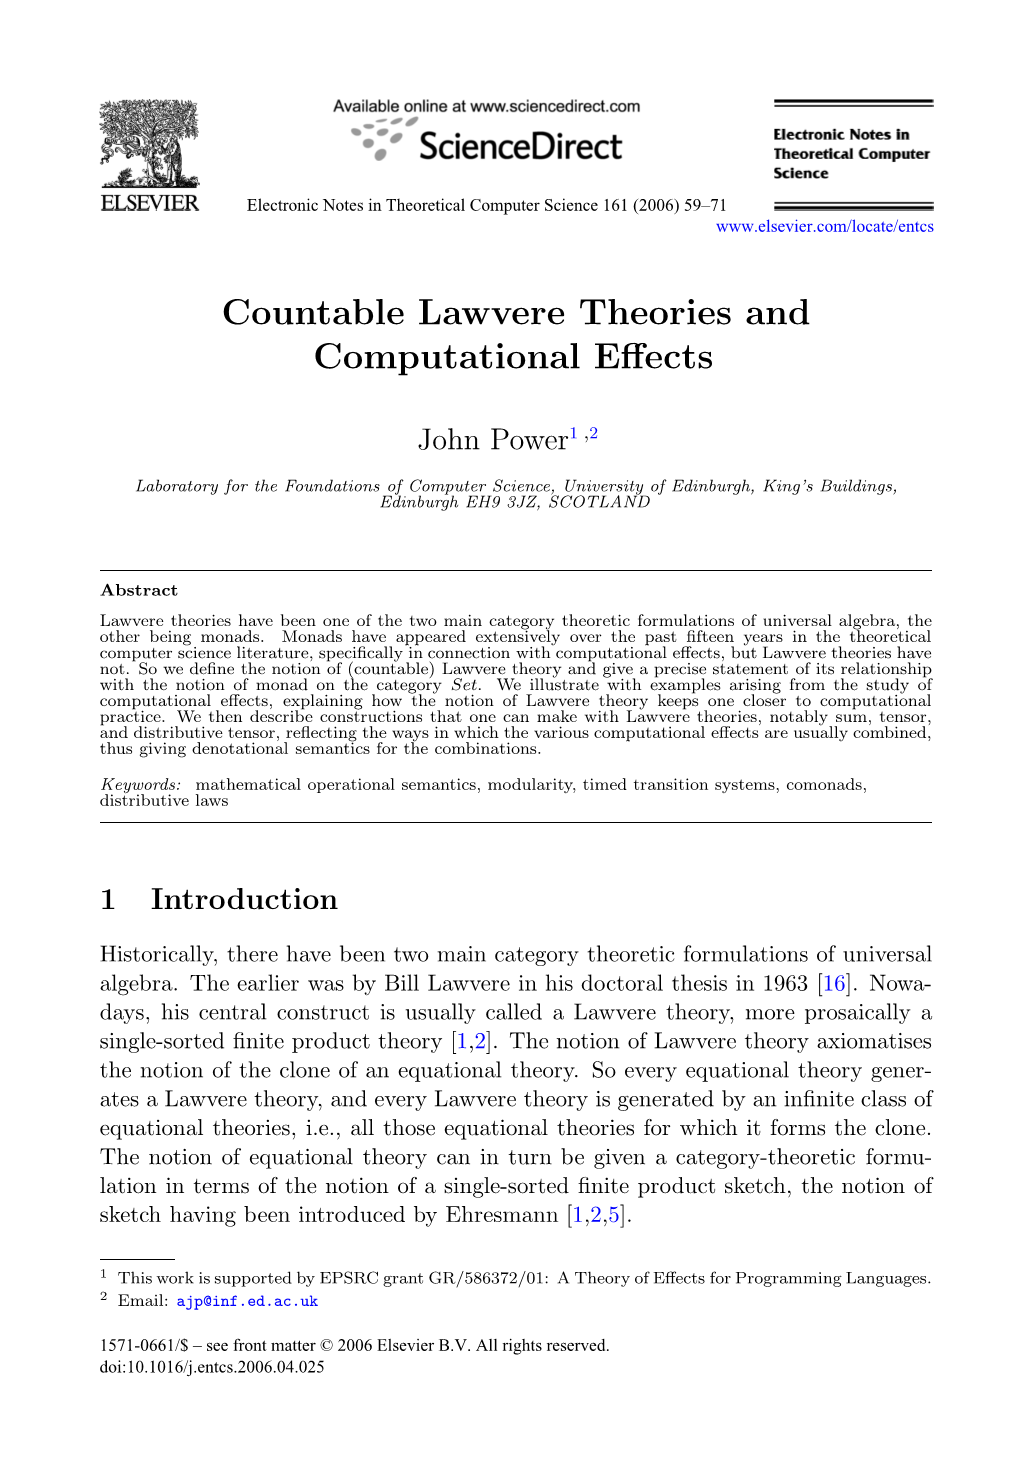 Countable Lawvere Theories and Computational Effects